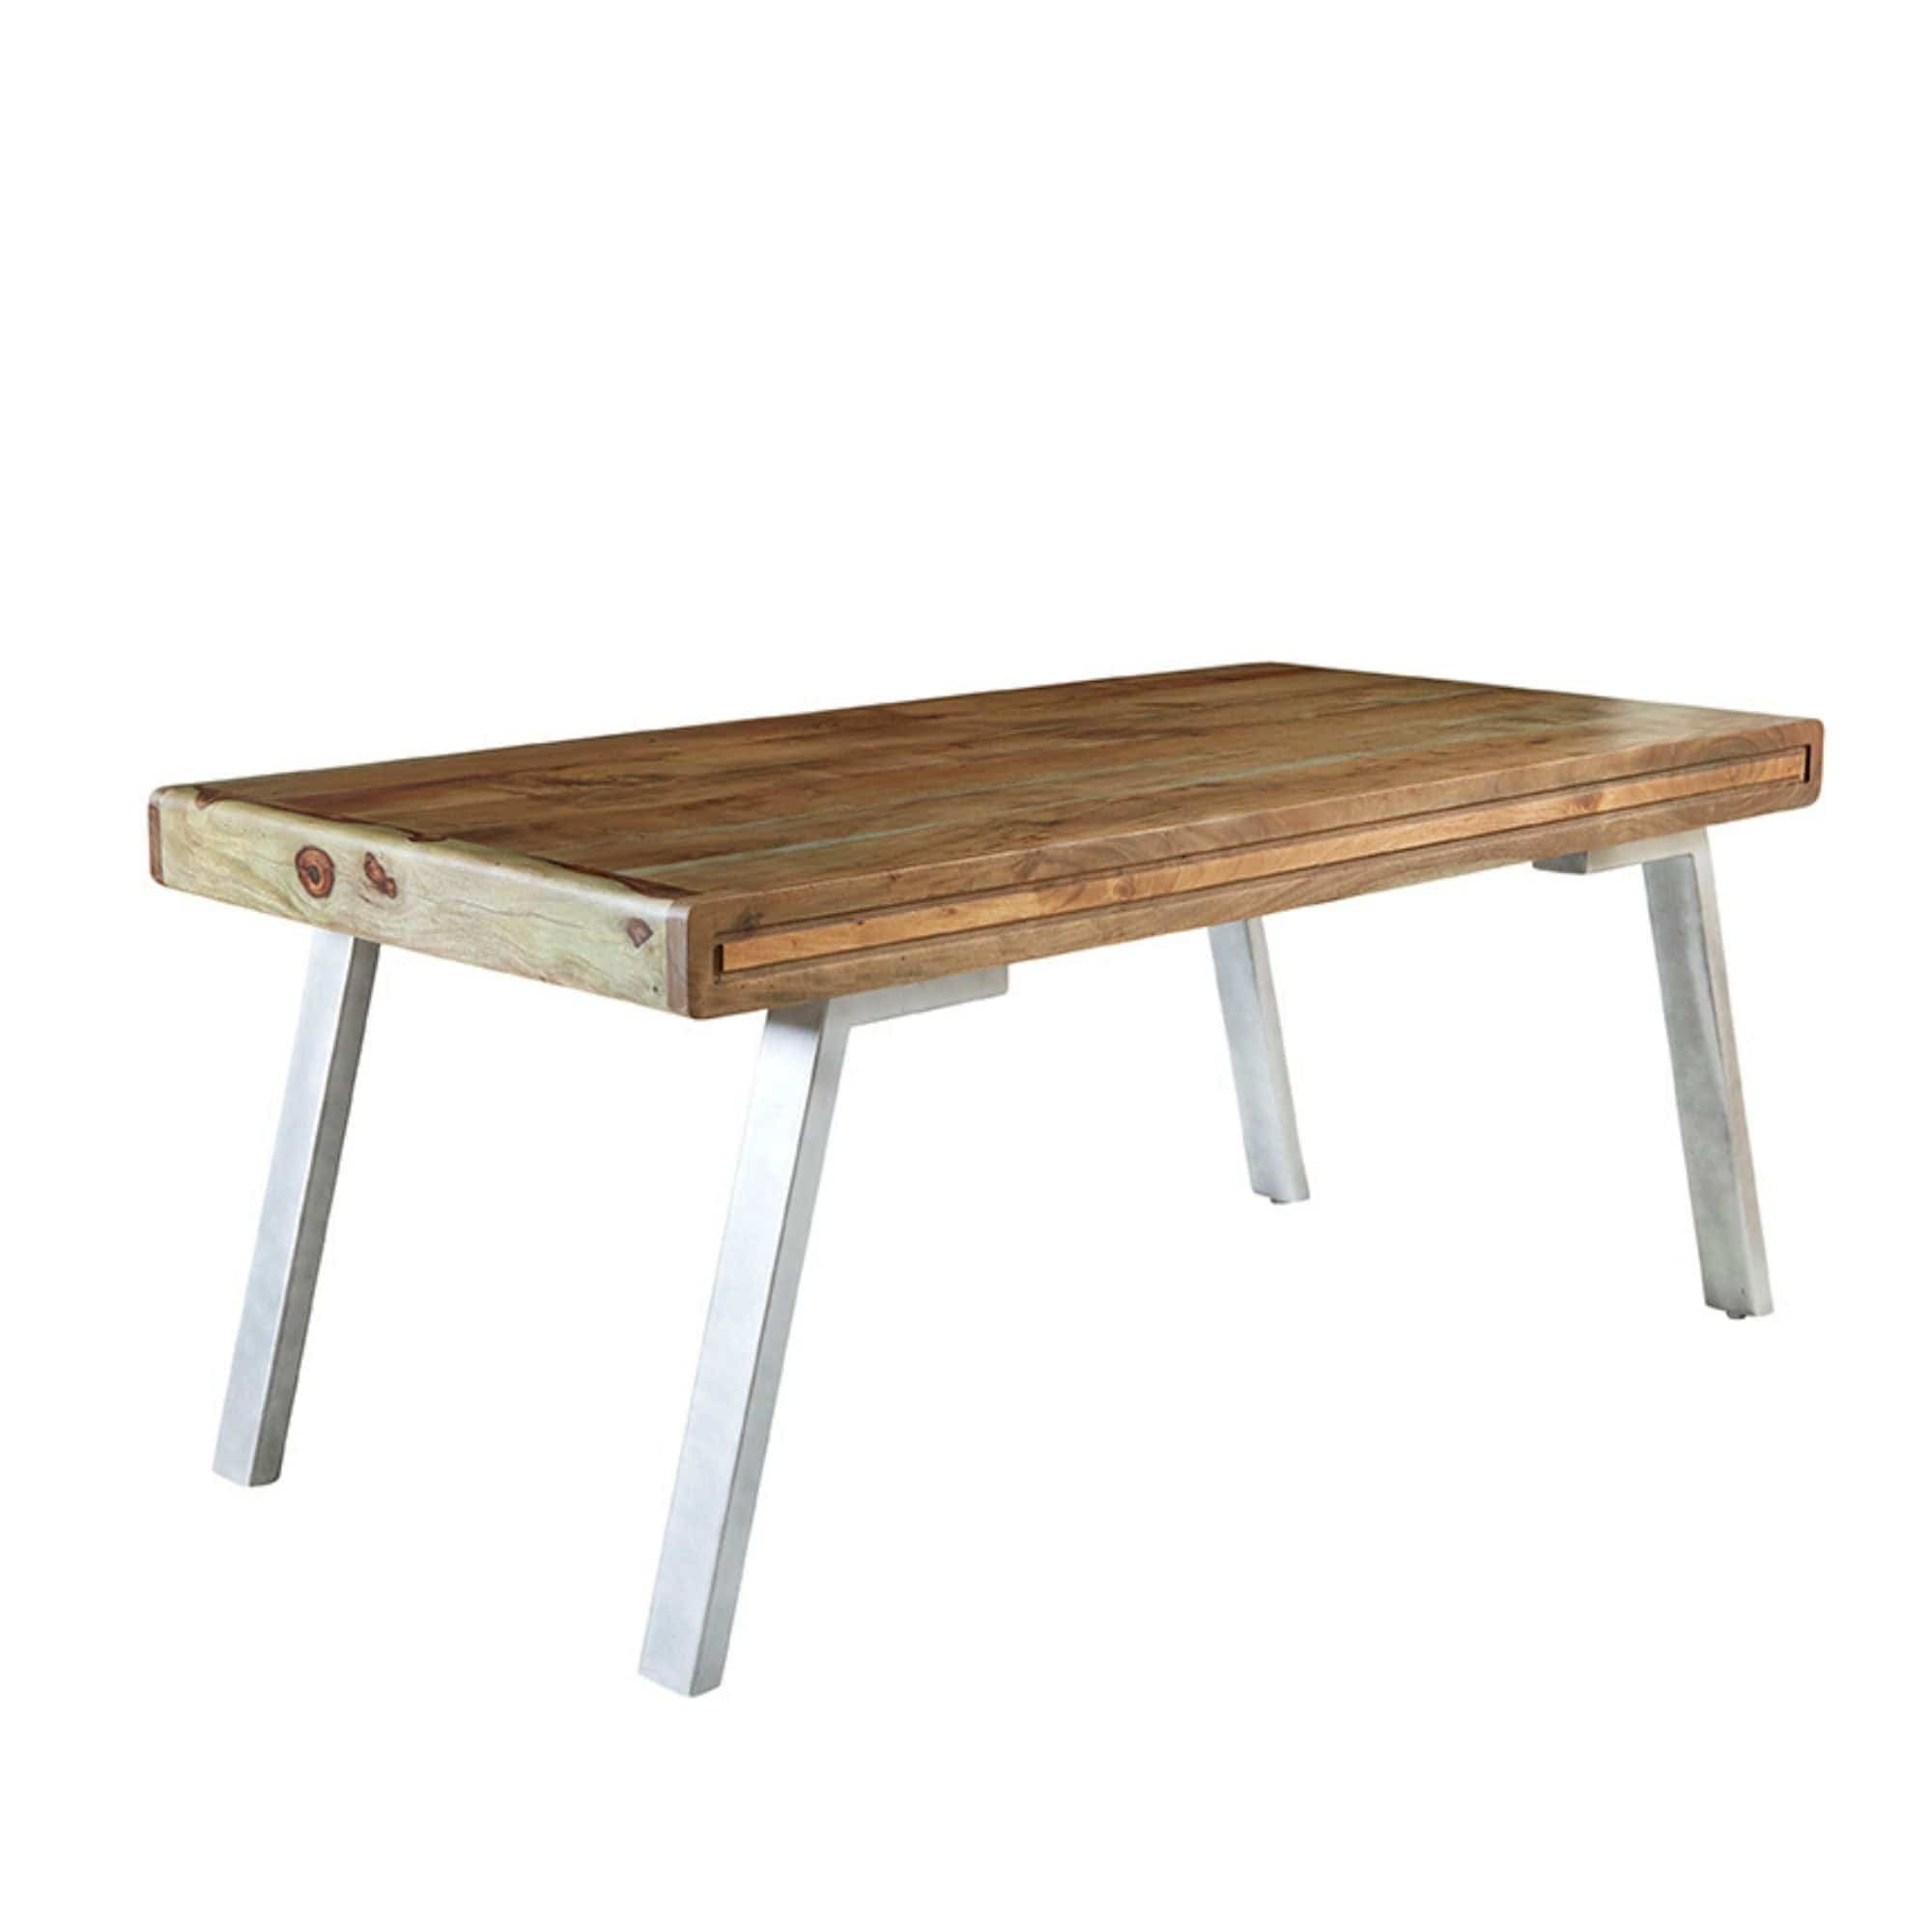 Kasia Solid Natural Acacia Wood and Reclaimed Metal Large Dining Table | MalletandPlane.com  